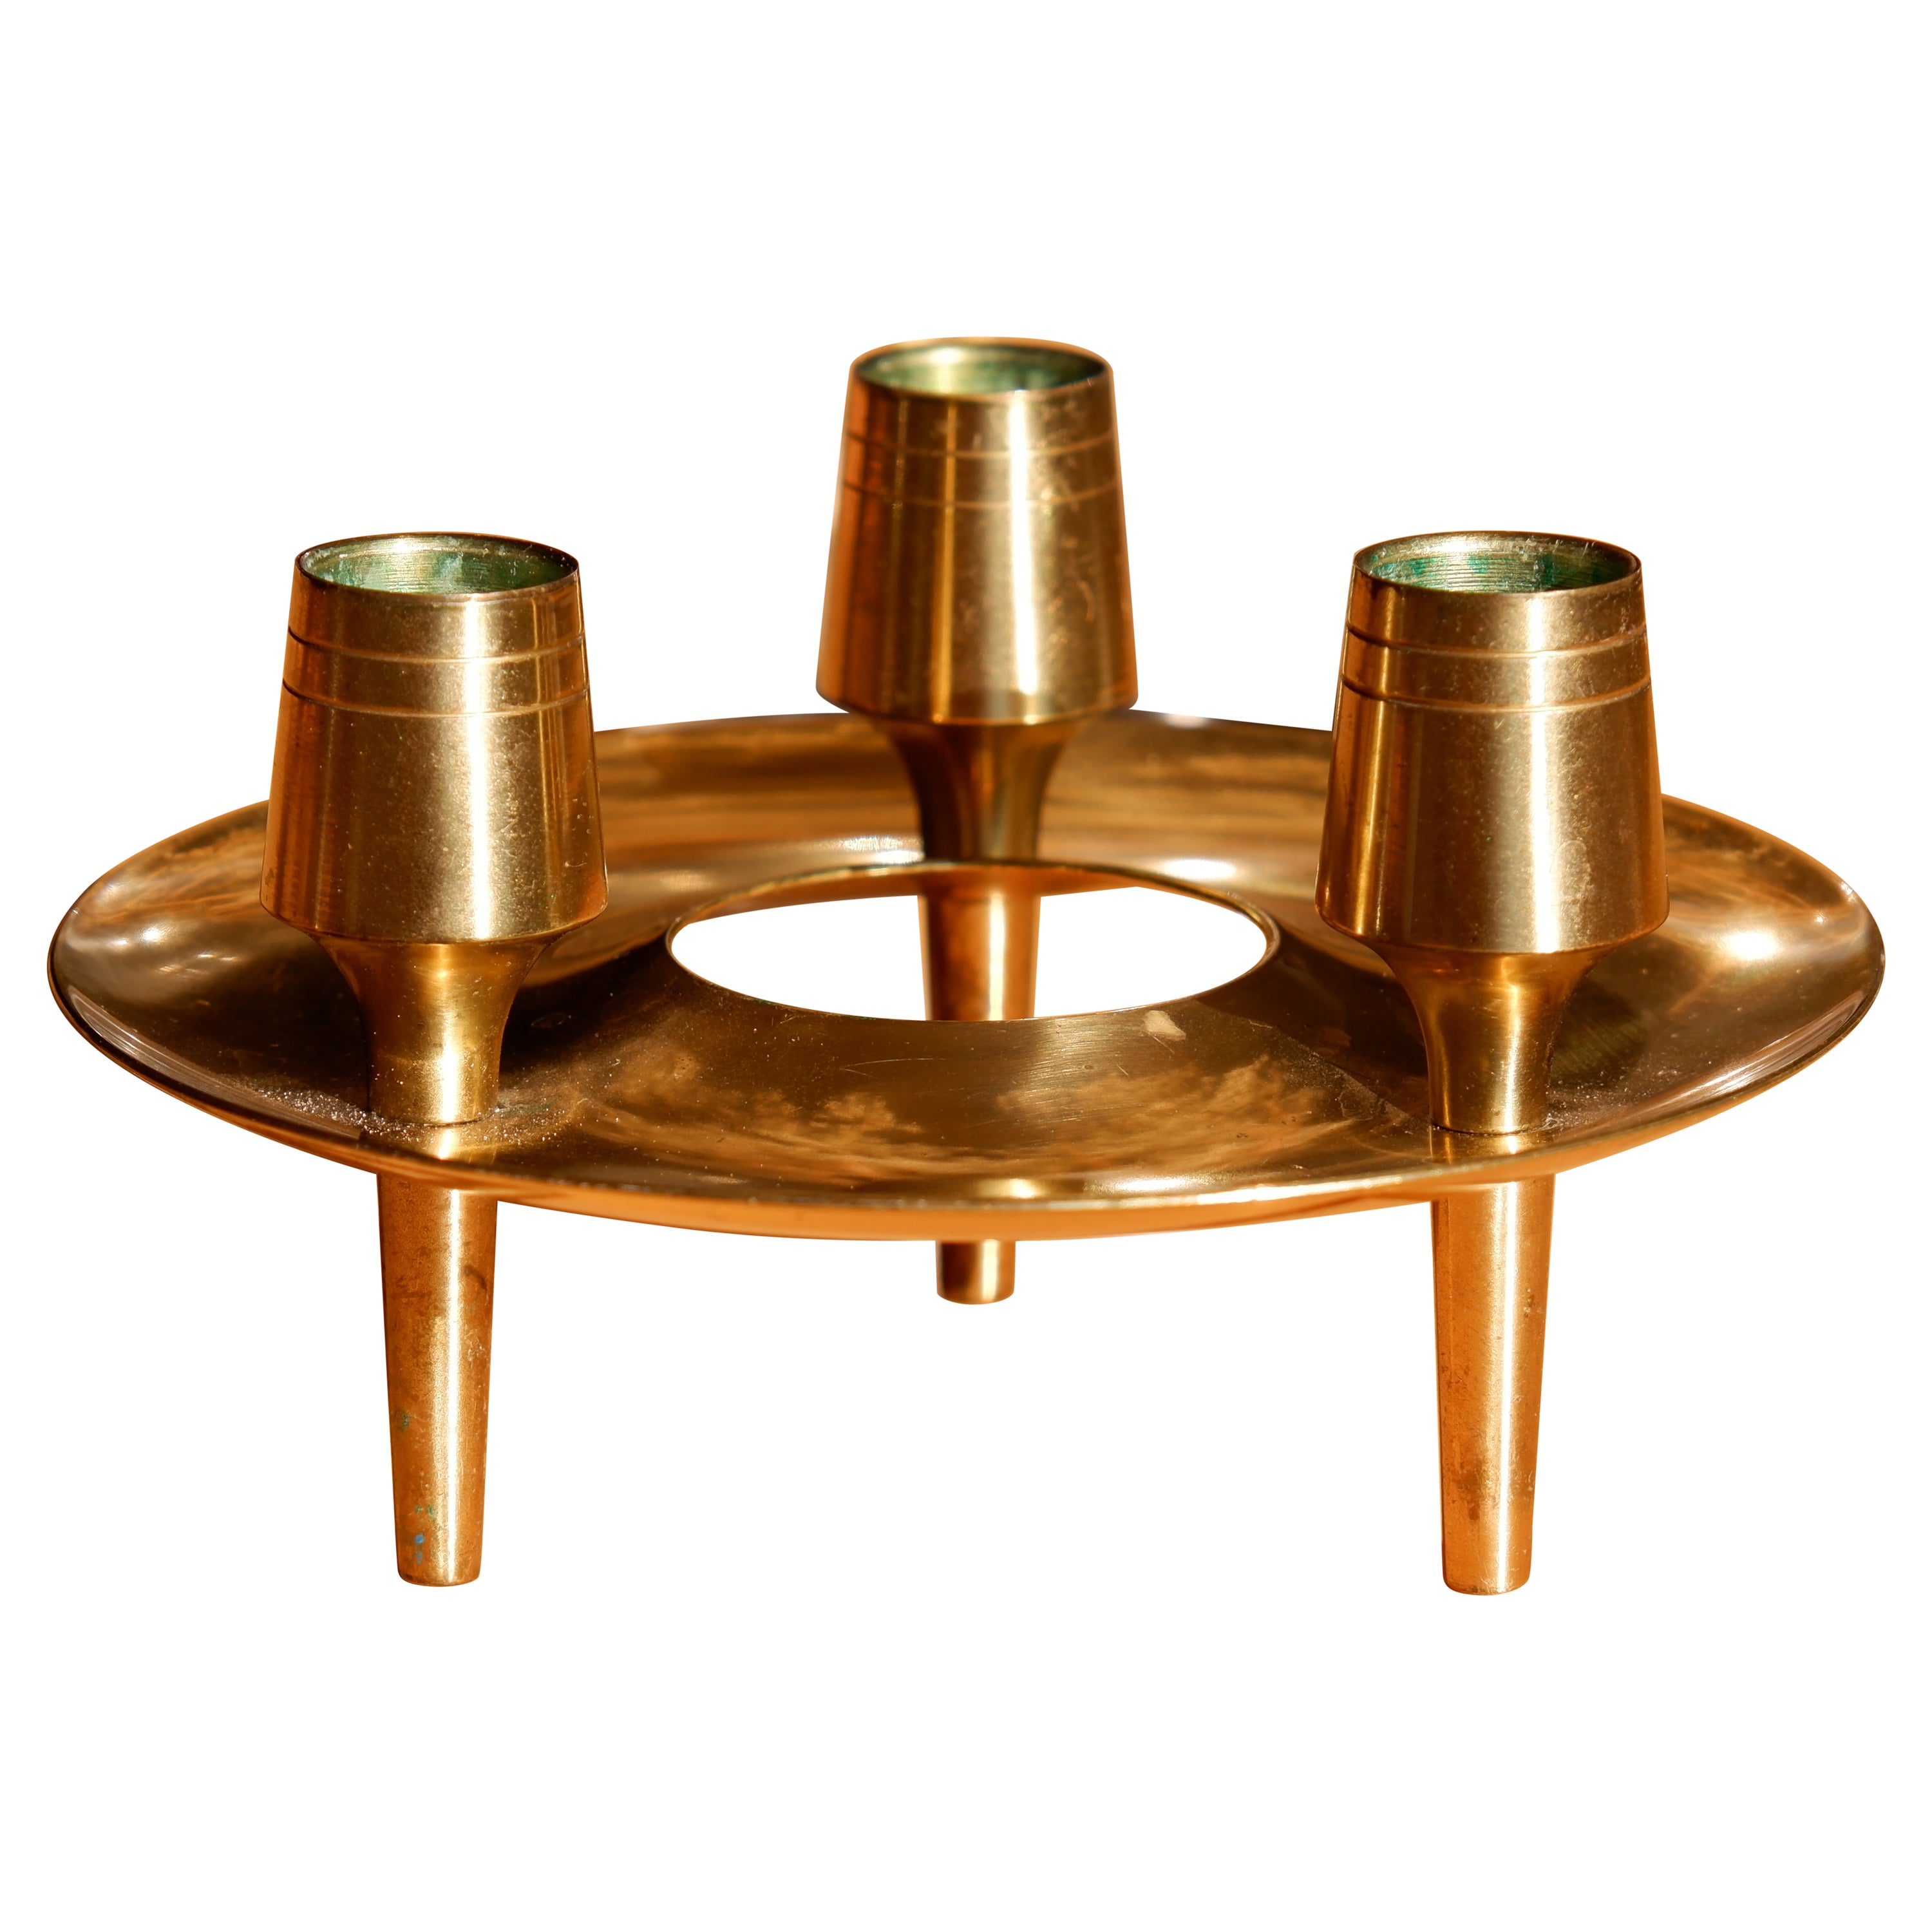 Paavo Tynell Brass Candle Holders for Taito